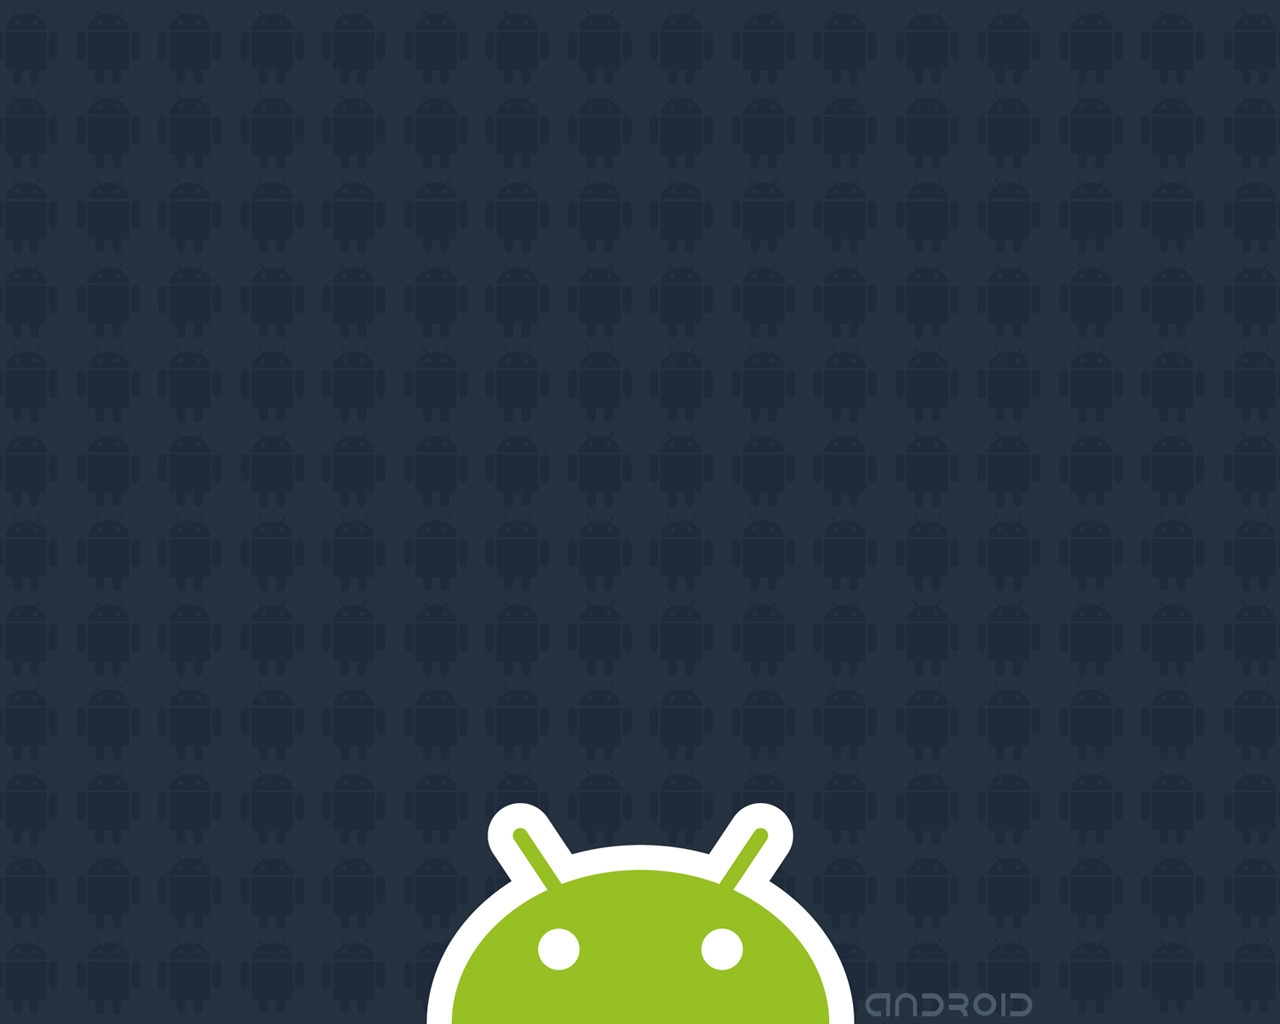 Android Pattern for 1280 x 1024 resolution